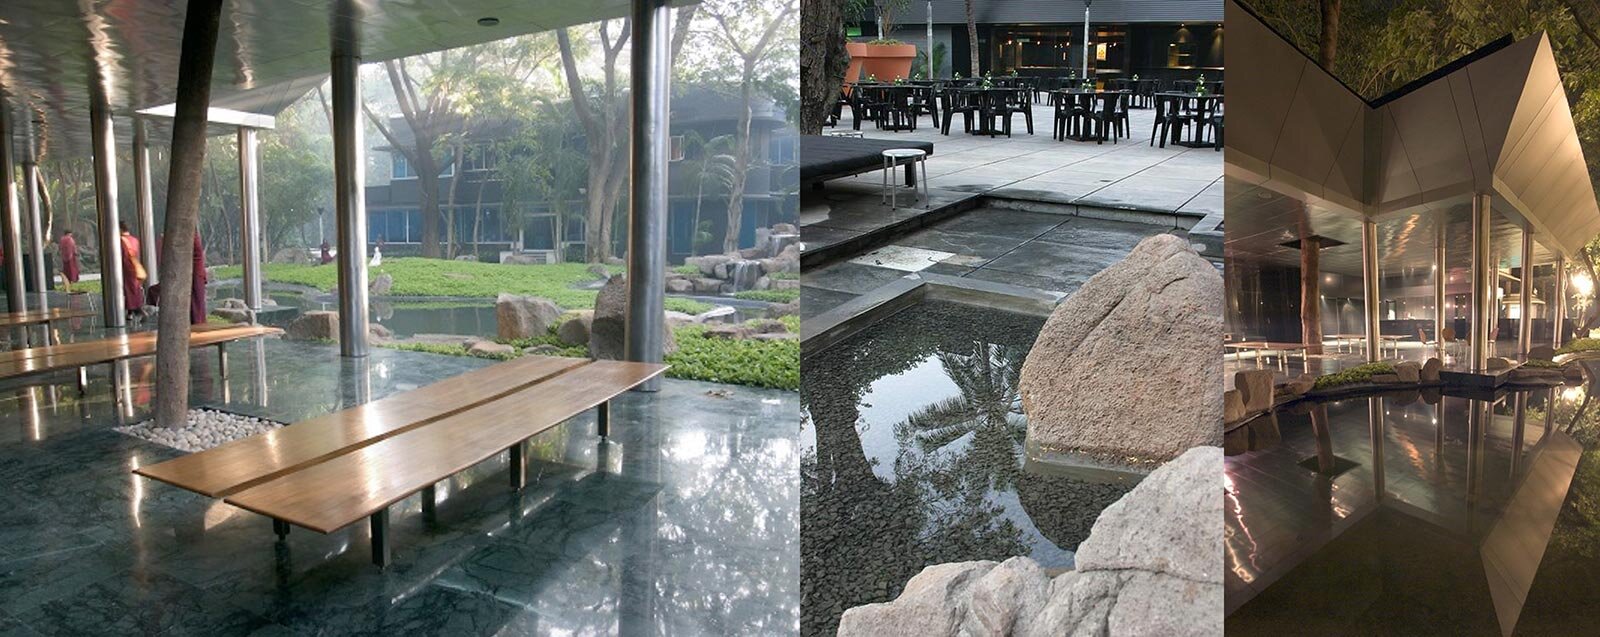 Collage of spaces at the OSHO Resort